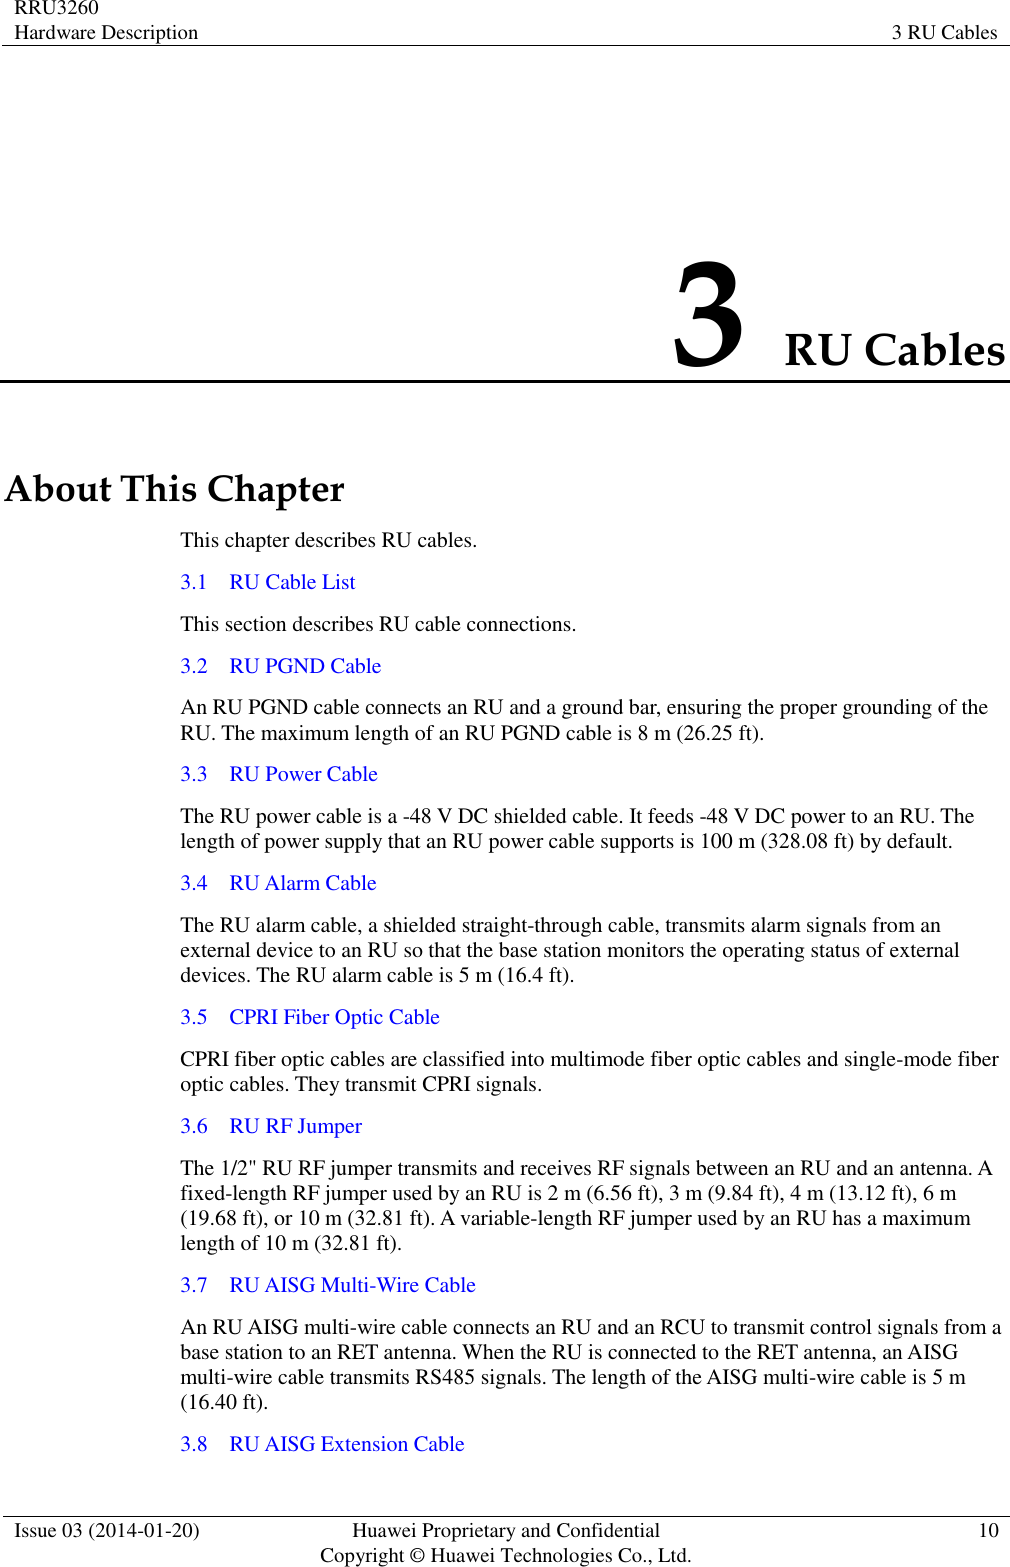 RRU3260 Hardware Description 3 RU Cables  Issue 03 (2014-01-20) Huawei Proprietary and Confidential                                     Copyright © Huawei Technologies Co., Ltd. 10  3 RU Cables About This Chapter This chapter describes RU cables. 3.1    RU Cable List This section describes RU cable connections. 3.2    RU PGND Cable An RU PGND cable connects an RU and a ground bar, ensuring the proper grounding of the RU. The maximum length of an RU PGND cable is 8 m (26.25 ft). 3.3    RU Power Cable The RU power cable is a -48 V DC shielded cable. It feeds -48 V DC power to an RU. The length of power supply that an RU power cable supports is 100 m (328.08 ft) by default. 3.4    RU Alarm Cable The RU alarm cable, a shielded straight-through cable, transmits alarm signals from an external device to an RU so that the base station monitors the operating status of external devices. The RU alarm cable is 5 m (16.4 ft). 3.5    CPRI Fiber Optic Cable CPRI fiber optic cables are classified into multimode fiber optic cables and single-mode fiber optic cables. They transmit CPRI signals. 3.6    RU RF Jumper The 1/2&quot; RU RF jumper transmits and receives RF signals between an RU and an antenna. A fixed-length RF jumper used by an RU is 2 m (6.56 ft), 3 m (9.84 ft), 4 m (13.12 ft), 6 m (19.68 ft), or 10 m (32.81 ft). A variable-length RF jumper used by an RU has a maximum length of 10 m (32.81 ft). 3.7    RU AISG Multi-Wire Cable An RU AISG multi-wire cable connects an RU and an RCU to transmit control signals from a base station to an RET antenna. When the RU is connected to the RET antenna, an AISG multi-wire cable transmits RS485 signals. The length of the AISG multi-wire cable is 5 m (16.40 ft). 3.8    RU AISG Extension Cable 